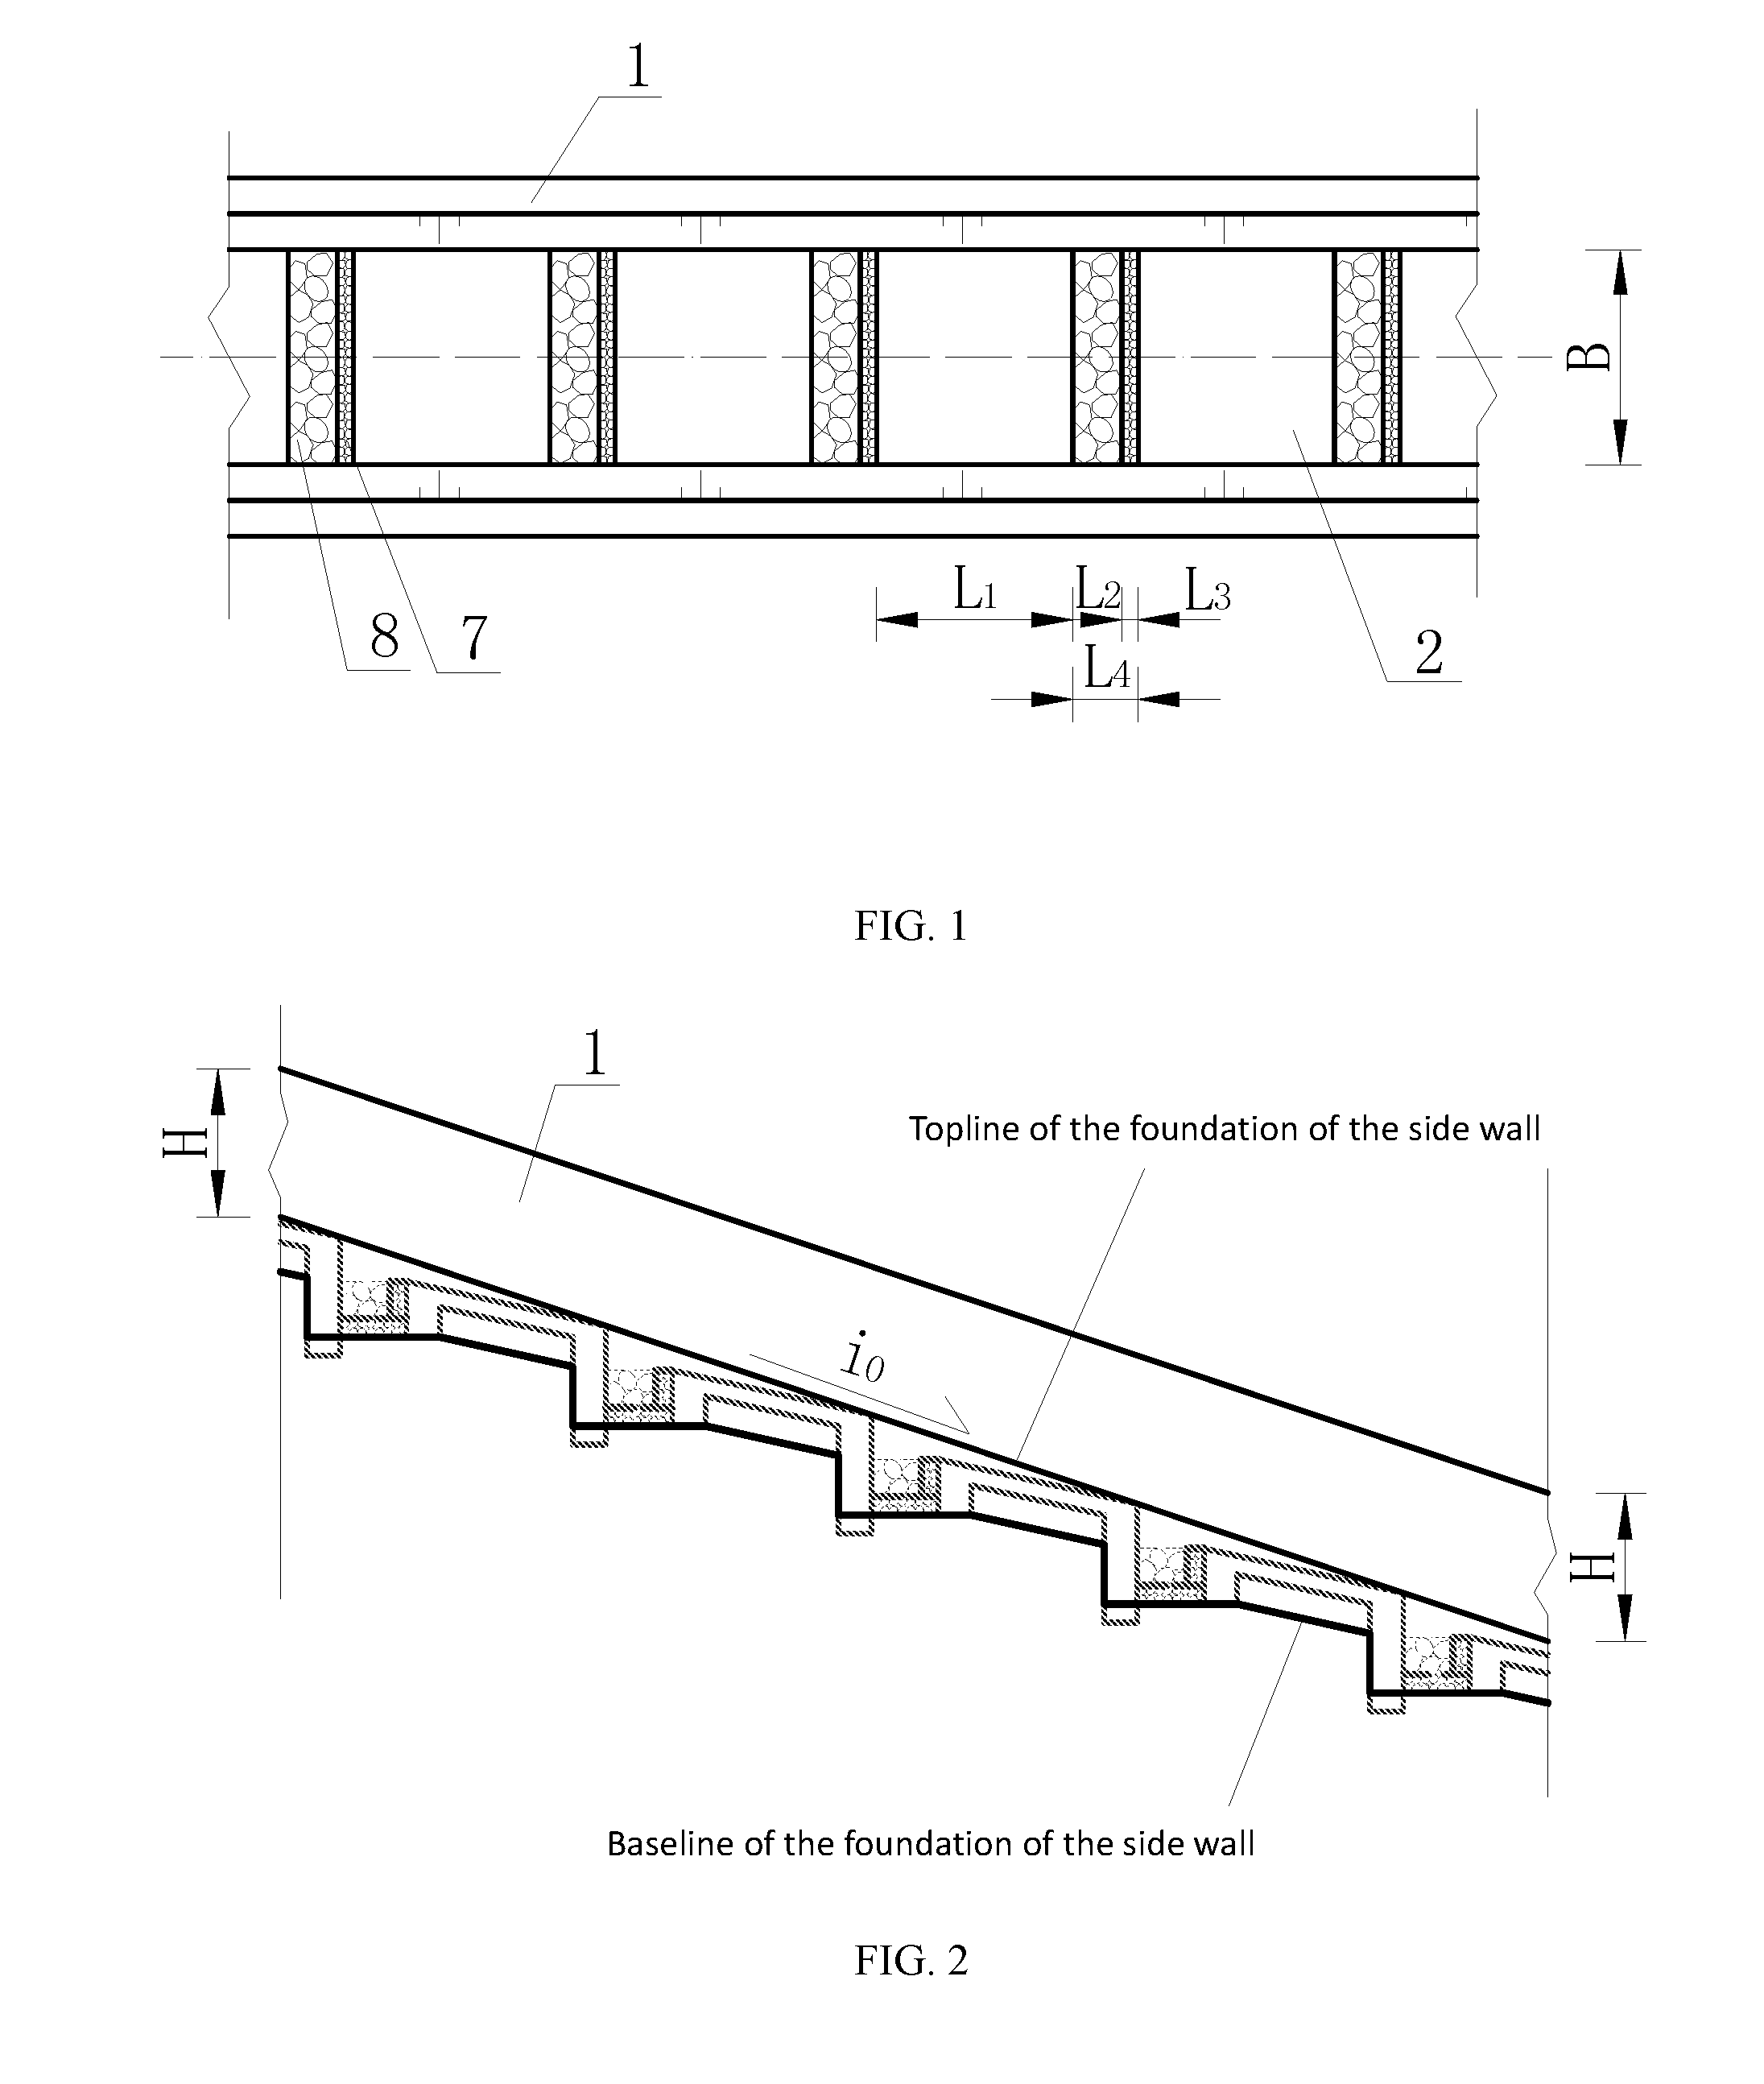 Debris flow drainage channel with step pool structure and its applications